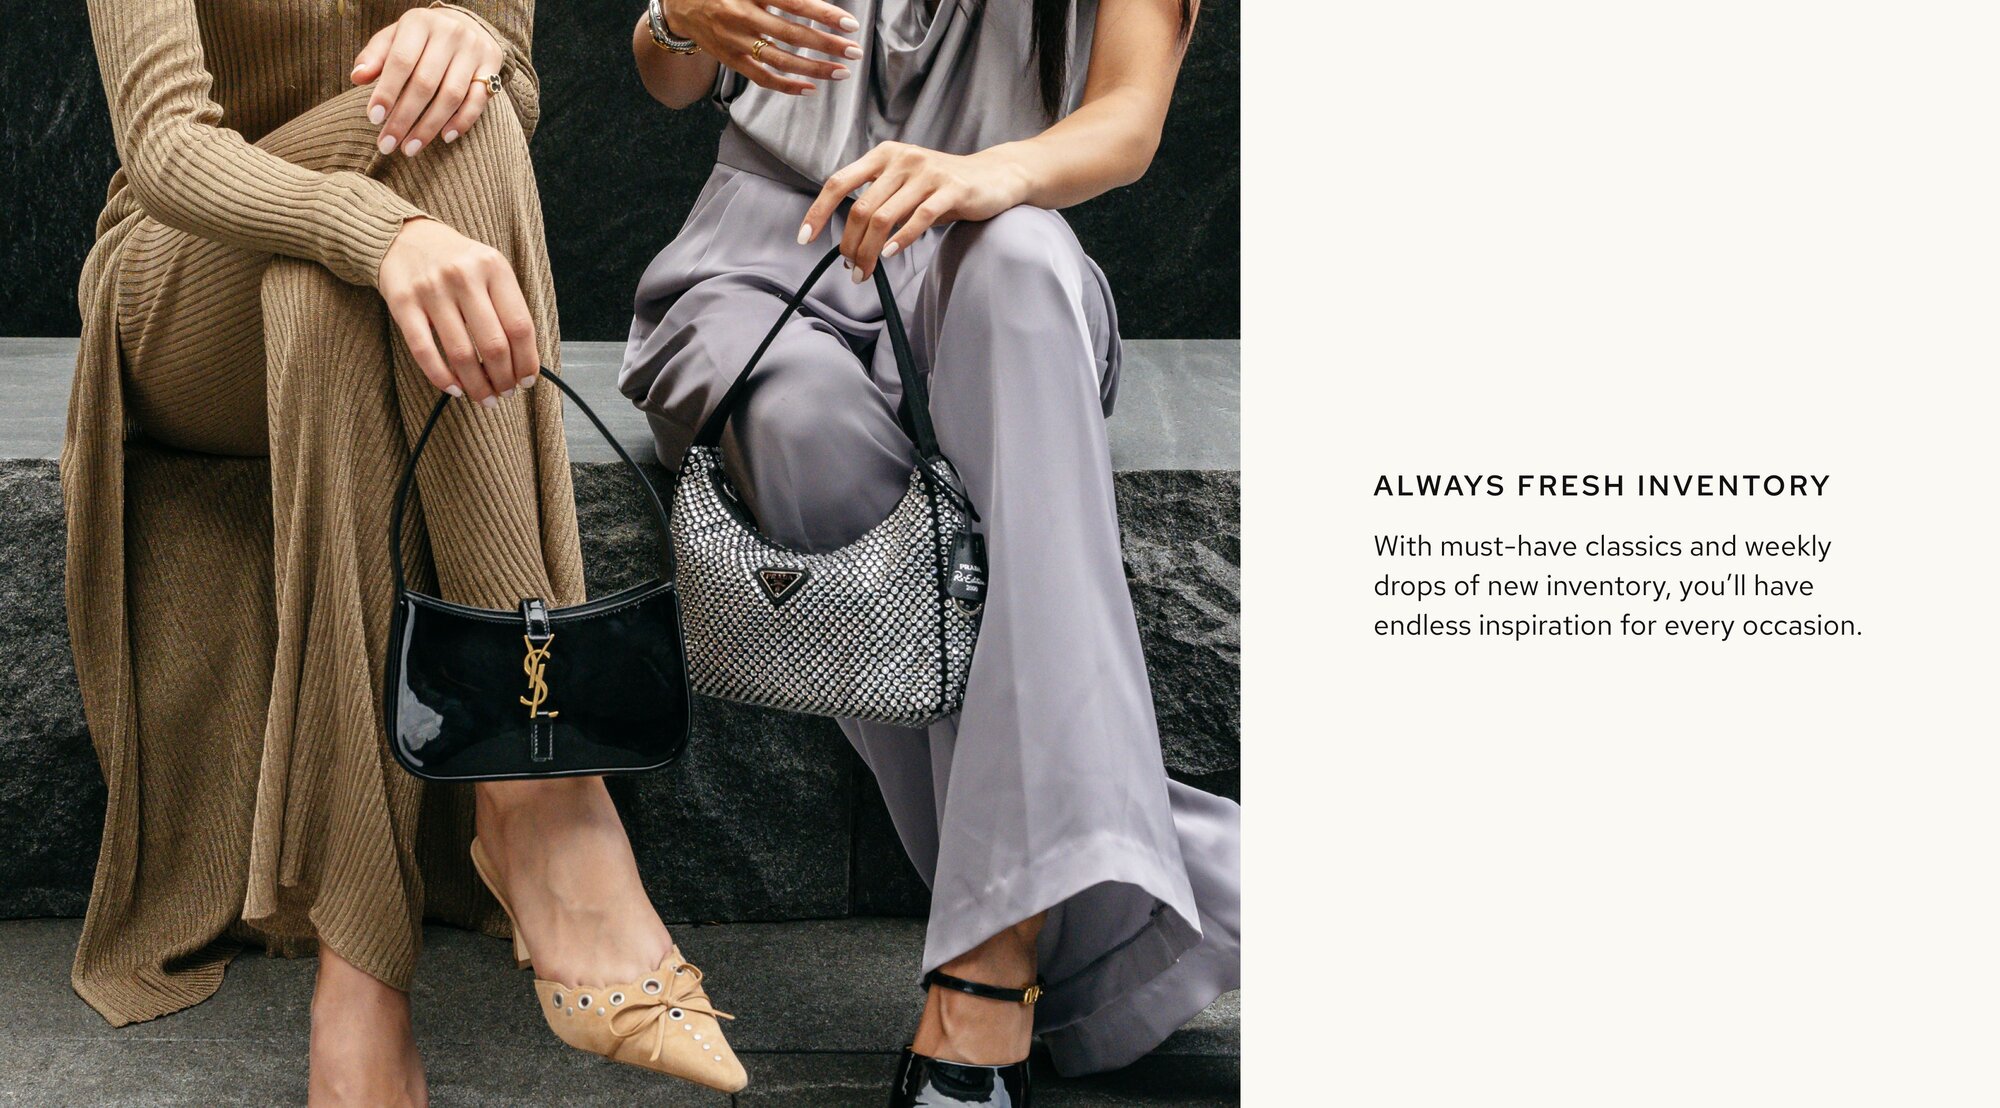 Photo of two women wearing elegant clothes and sitting down, each with a Vivrelle luxe bag in hand. Text on image reads: "Always Fresh Inventory: With must-have classics and weekly drops of new inventory, you’ll have endless inspiration for every occasion.”